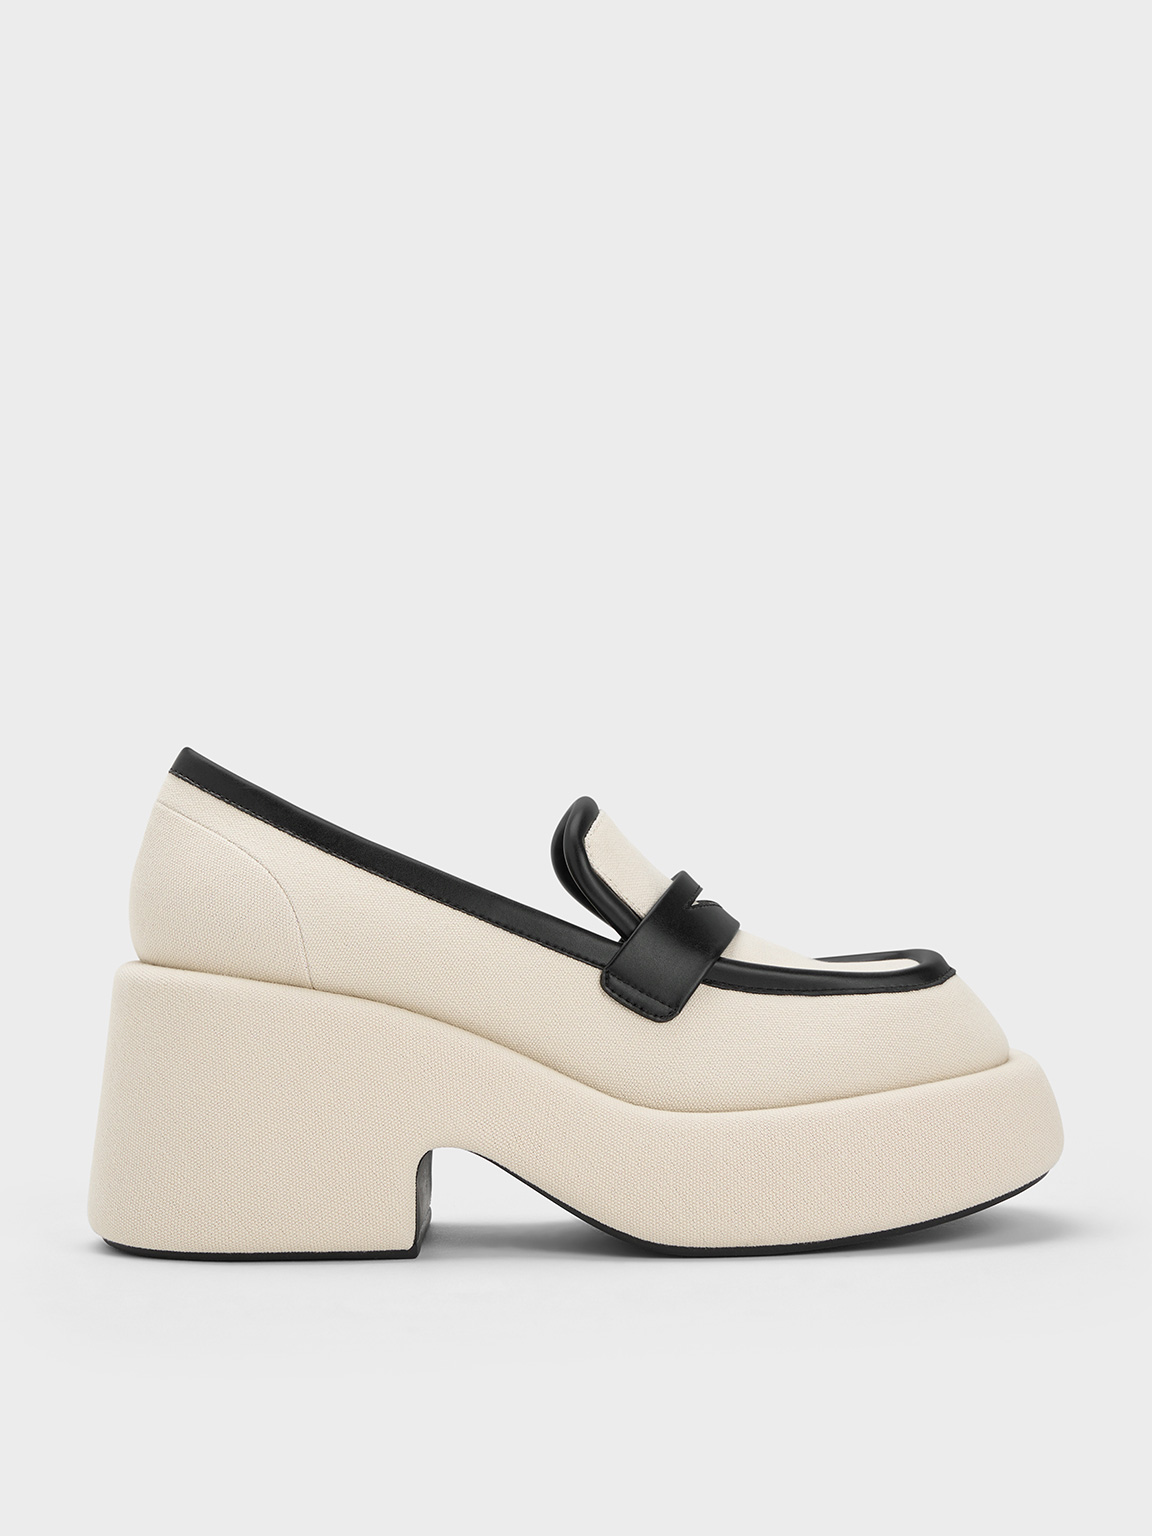 Charles & Keith Leni Canvas Platform Loafers In Black